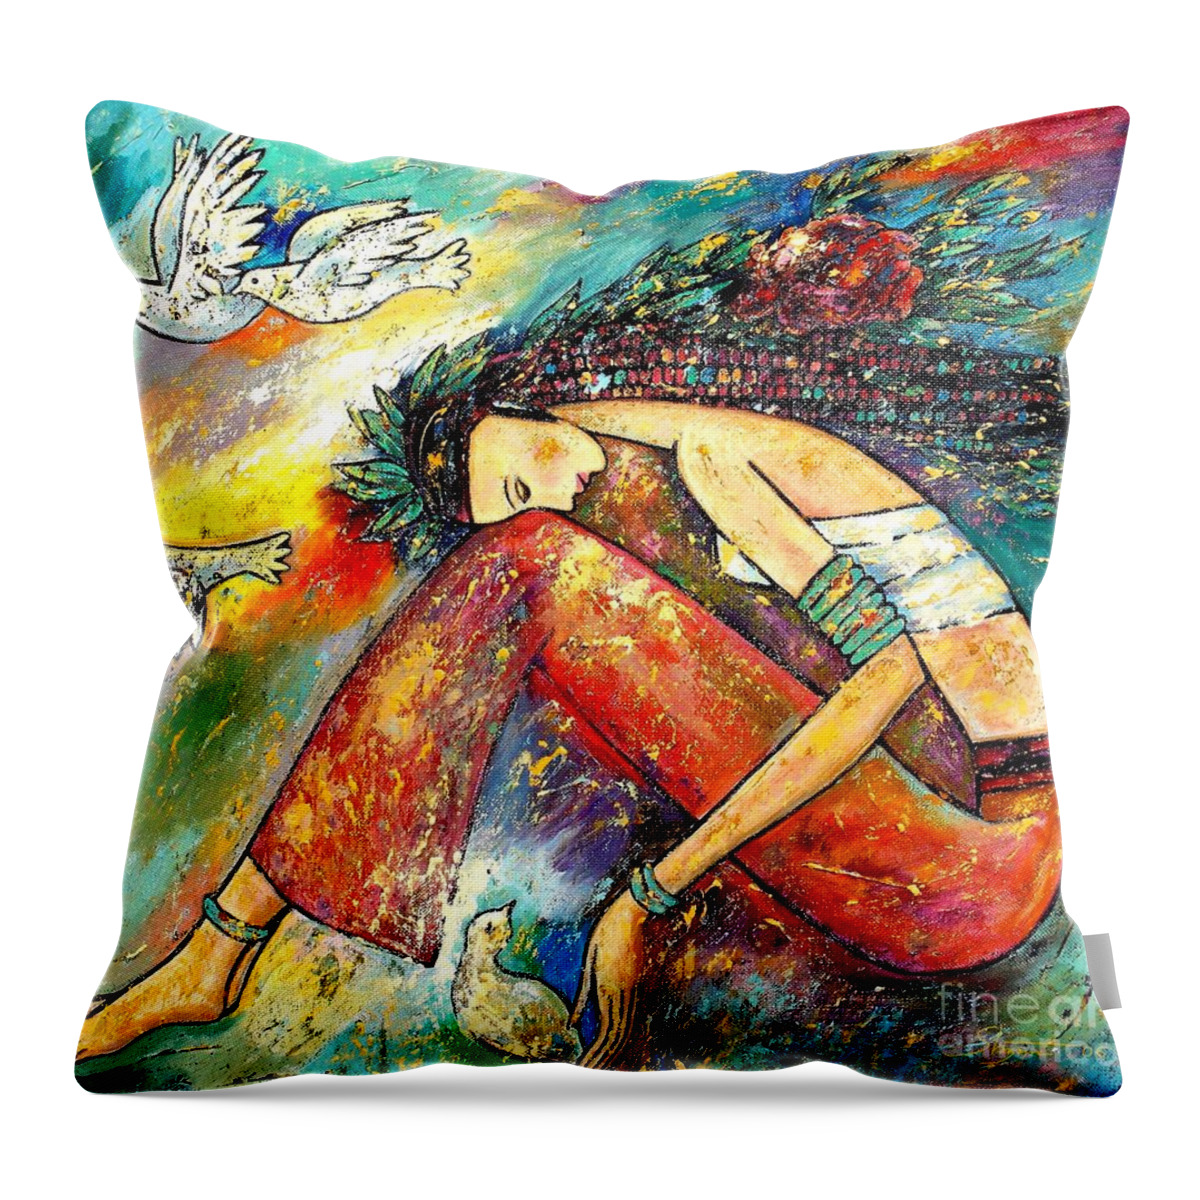 Portrait Art Throw Pillow featuring the painting Blessed Seasons I by Shijun Munns